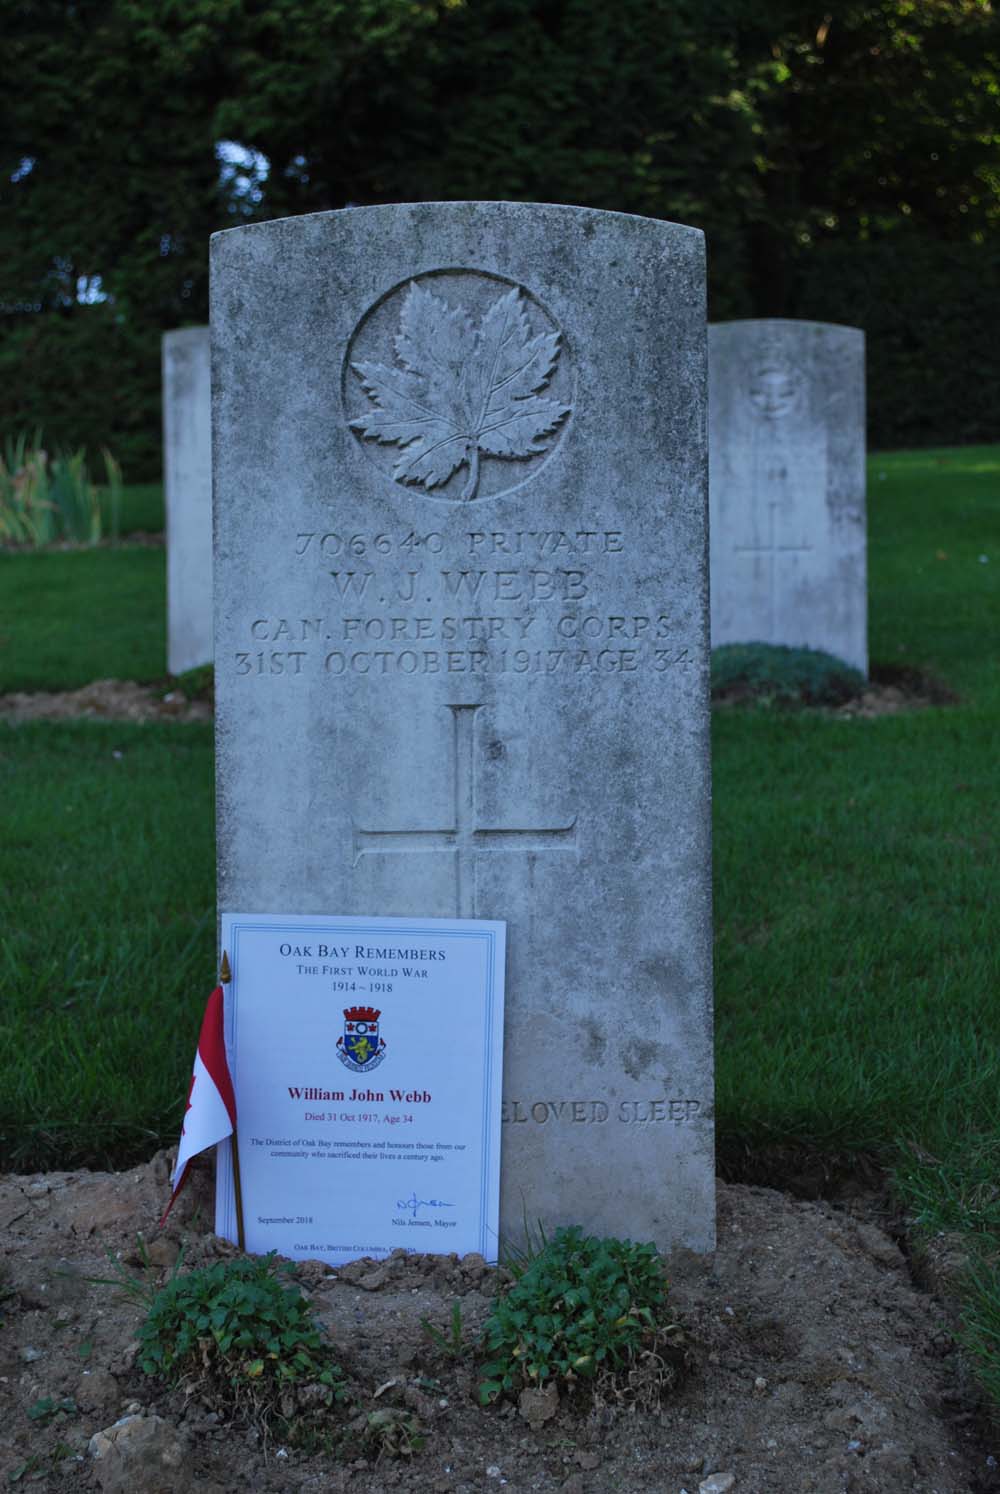 Memorial to Private William John Webb, Aveluy Communal Cemetery Extension, France (Photo: C. Duncan, 2018)